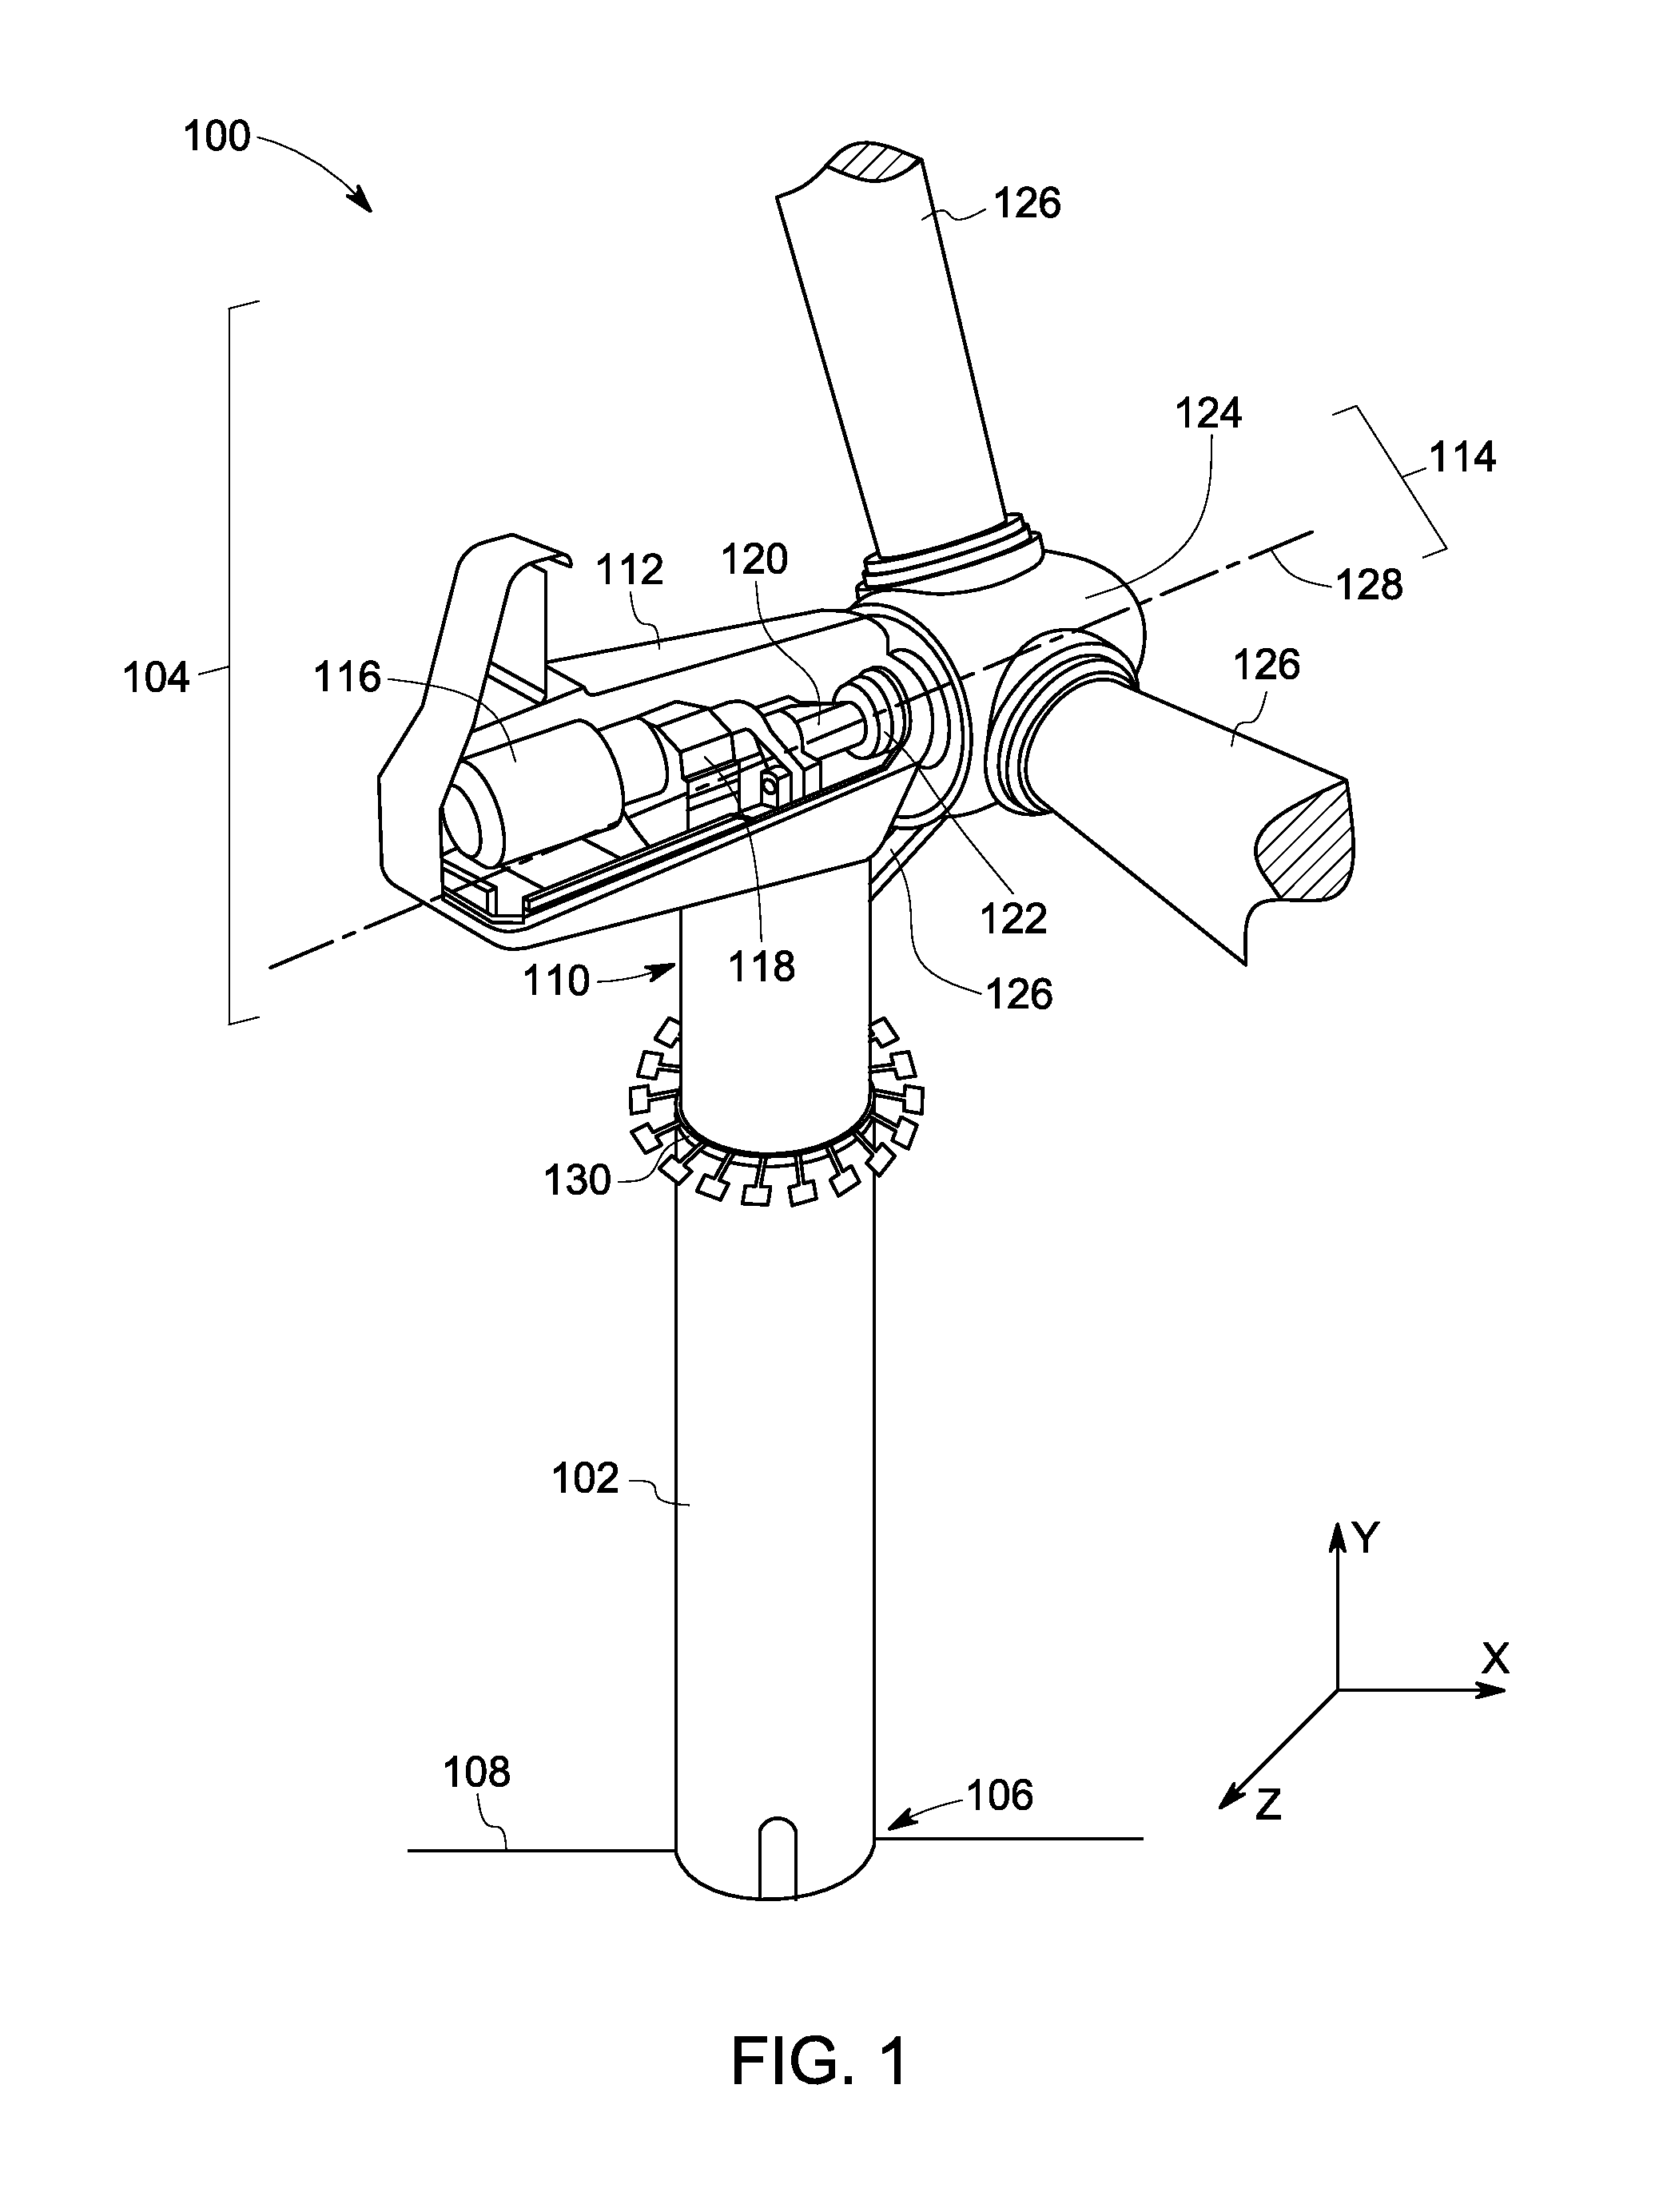 Systems and methods for attenuating noise in a wind turbine